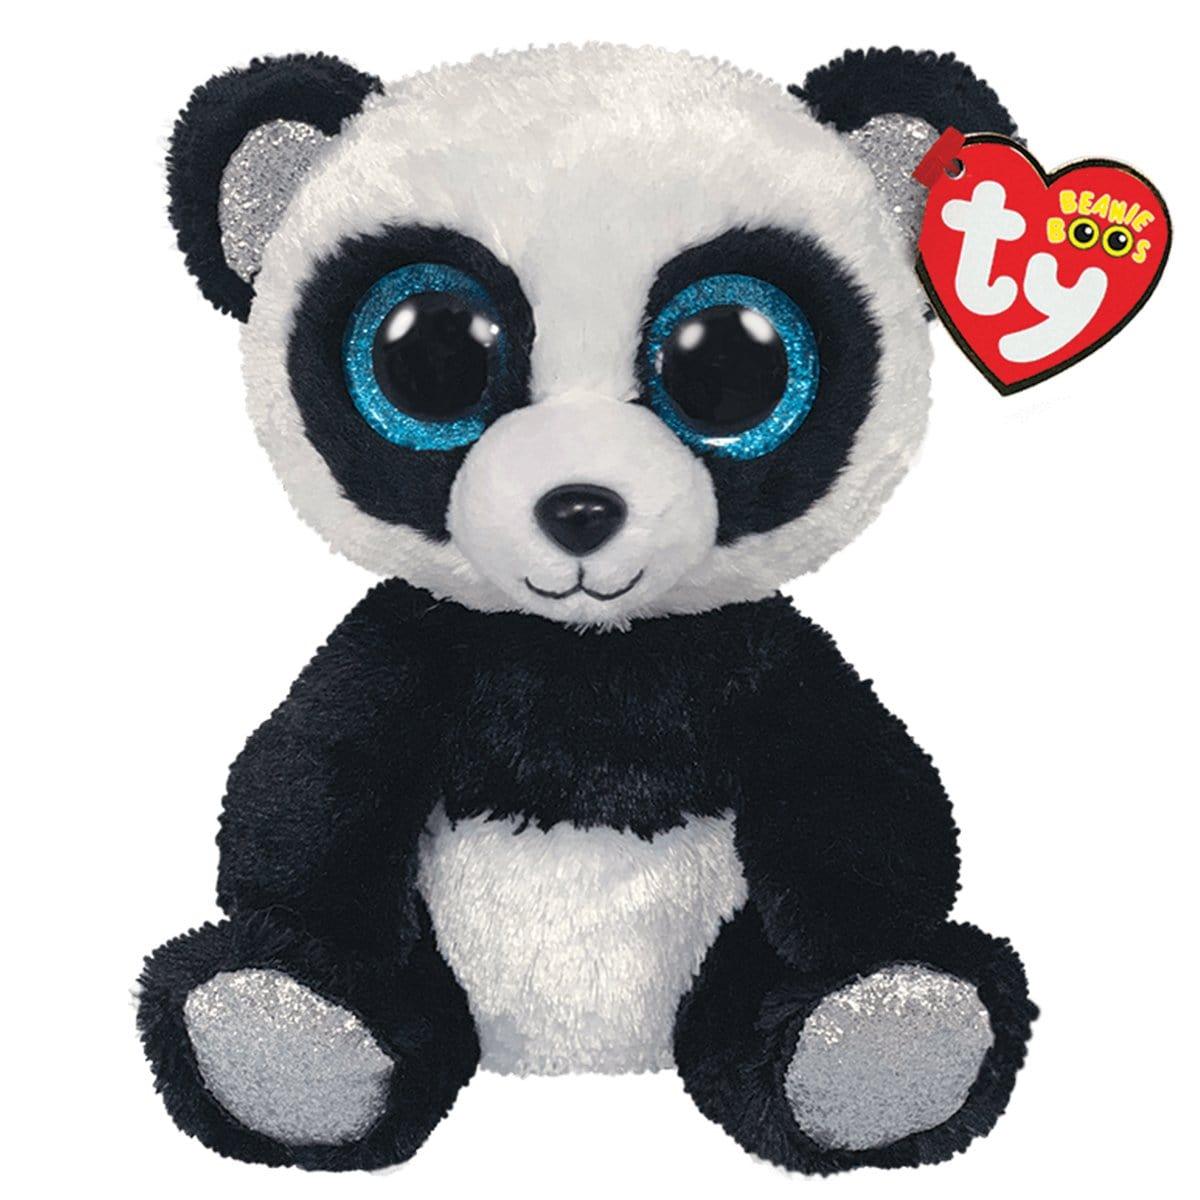 Buy Plushes Beanie Boo - Bamboo sold at Party Expert